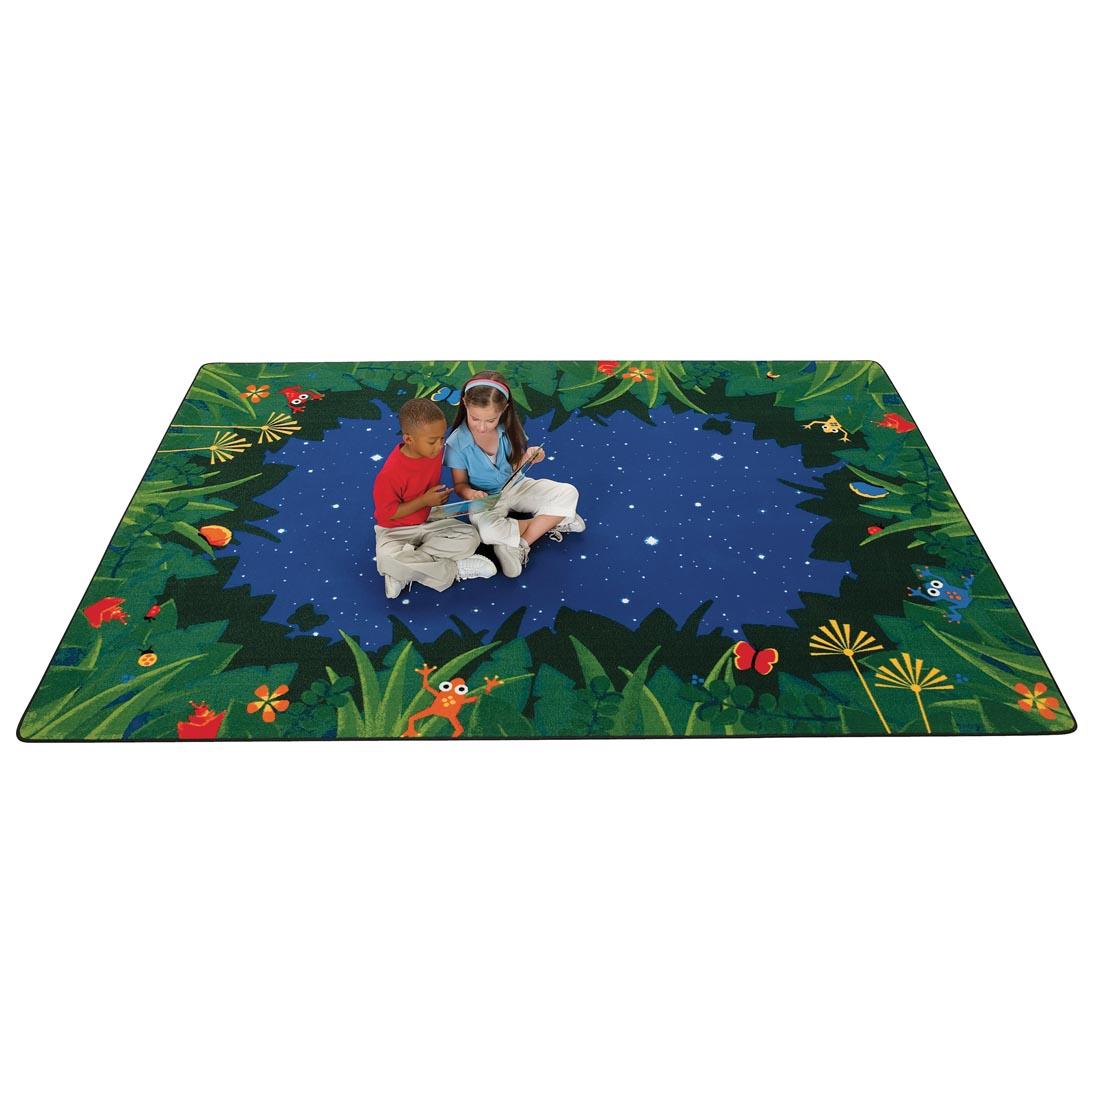 Children looking at a book while sitting on the Peaceful Tropical Night Rectangle Rug by Carpets For Kids